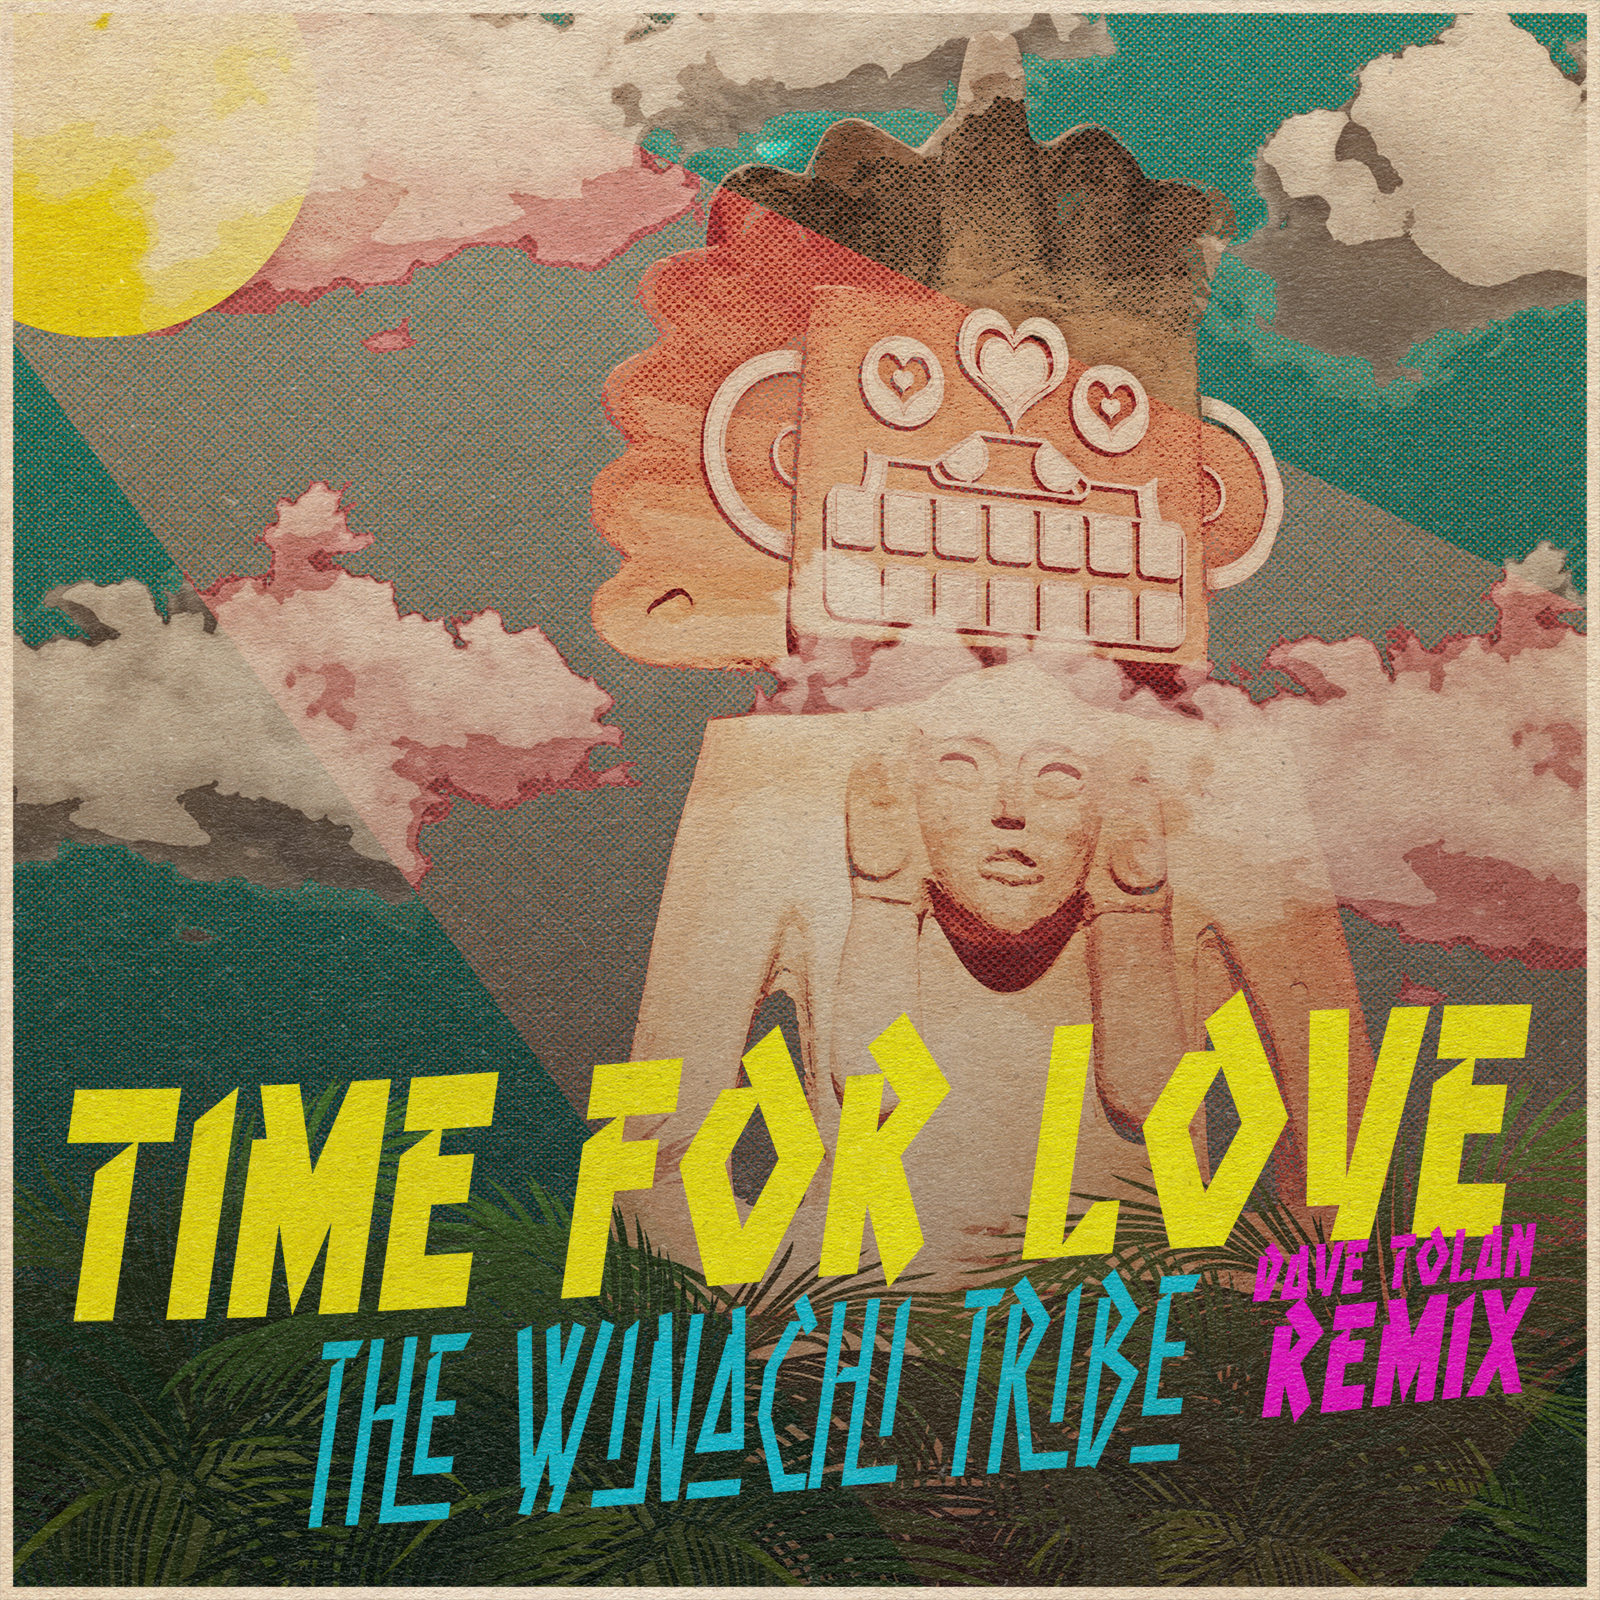 THE WINACHI TRIBE release 'Time for Love – (Dave Tolan remix)' - Listen Now! 1